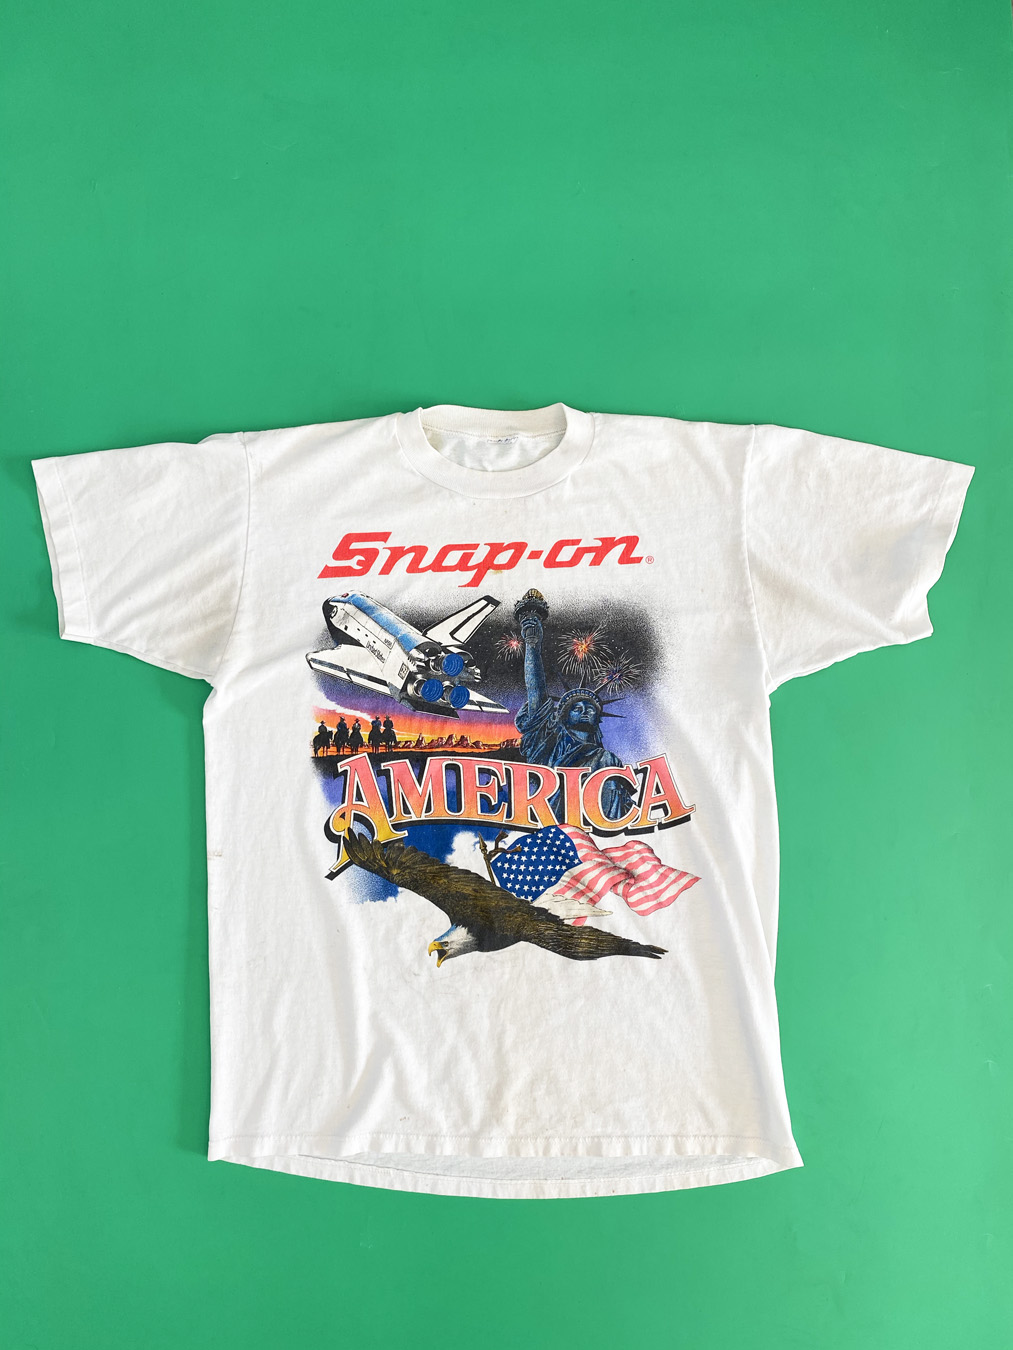 80s Snap On Tools Thermal t-shirt Small - The Captains Vintage